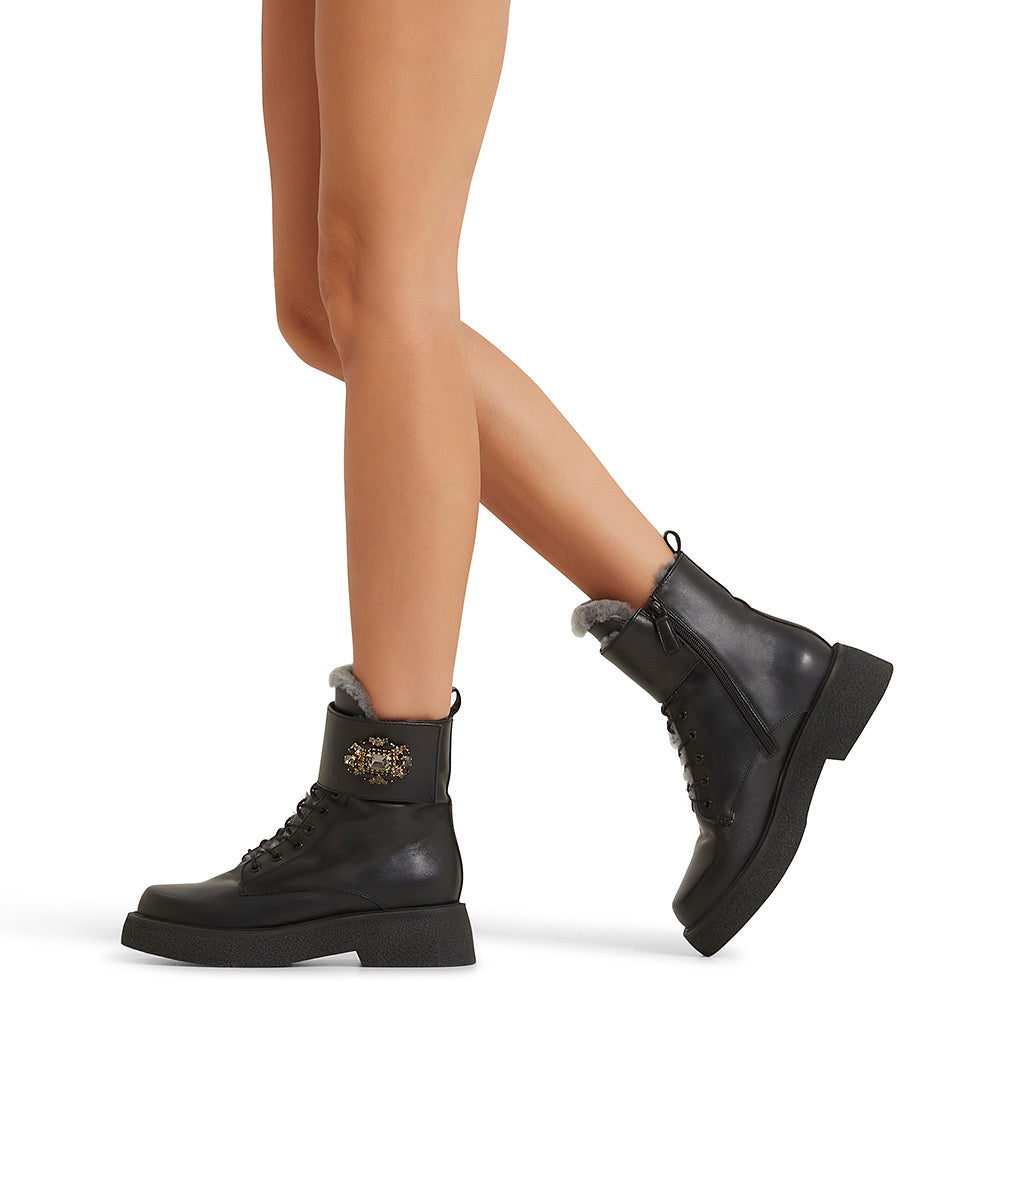 Jewel-buckle black leather lined ankle boots